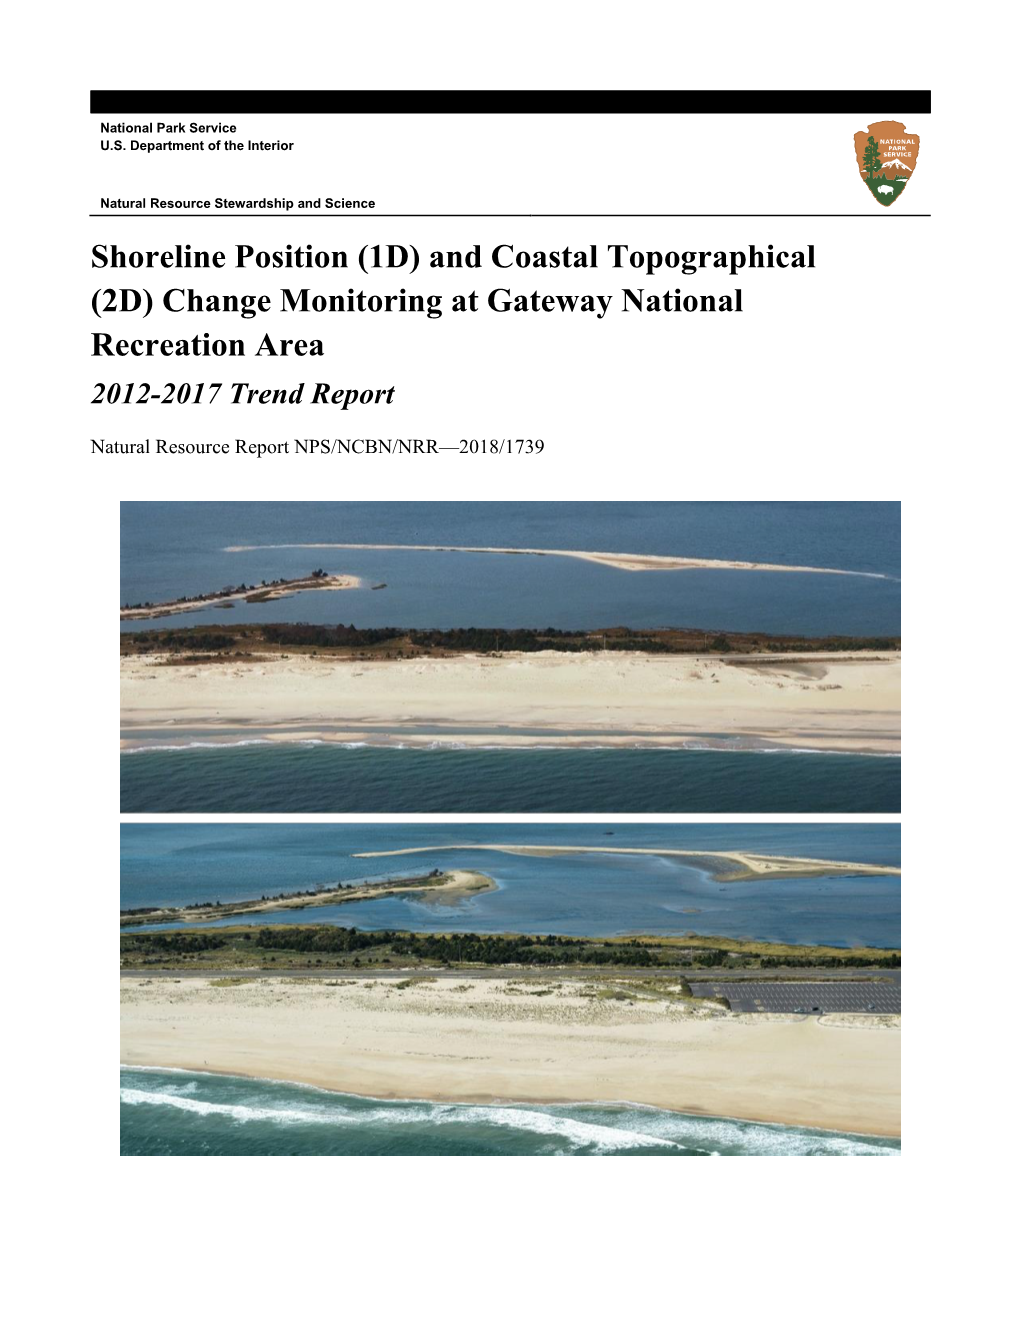 Change Monitoring at Gateway National Recreation Area 2012-2017 Trend Report